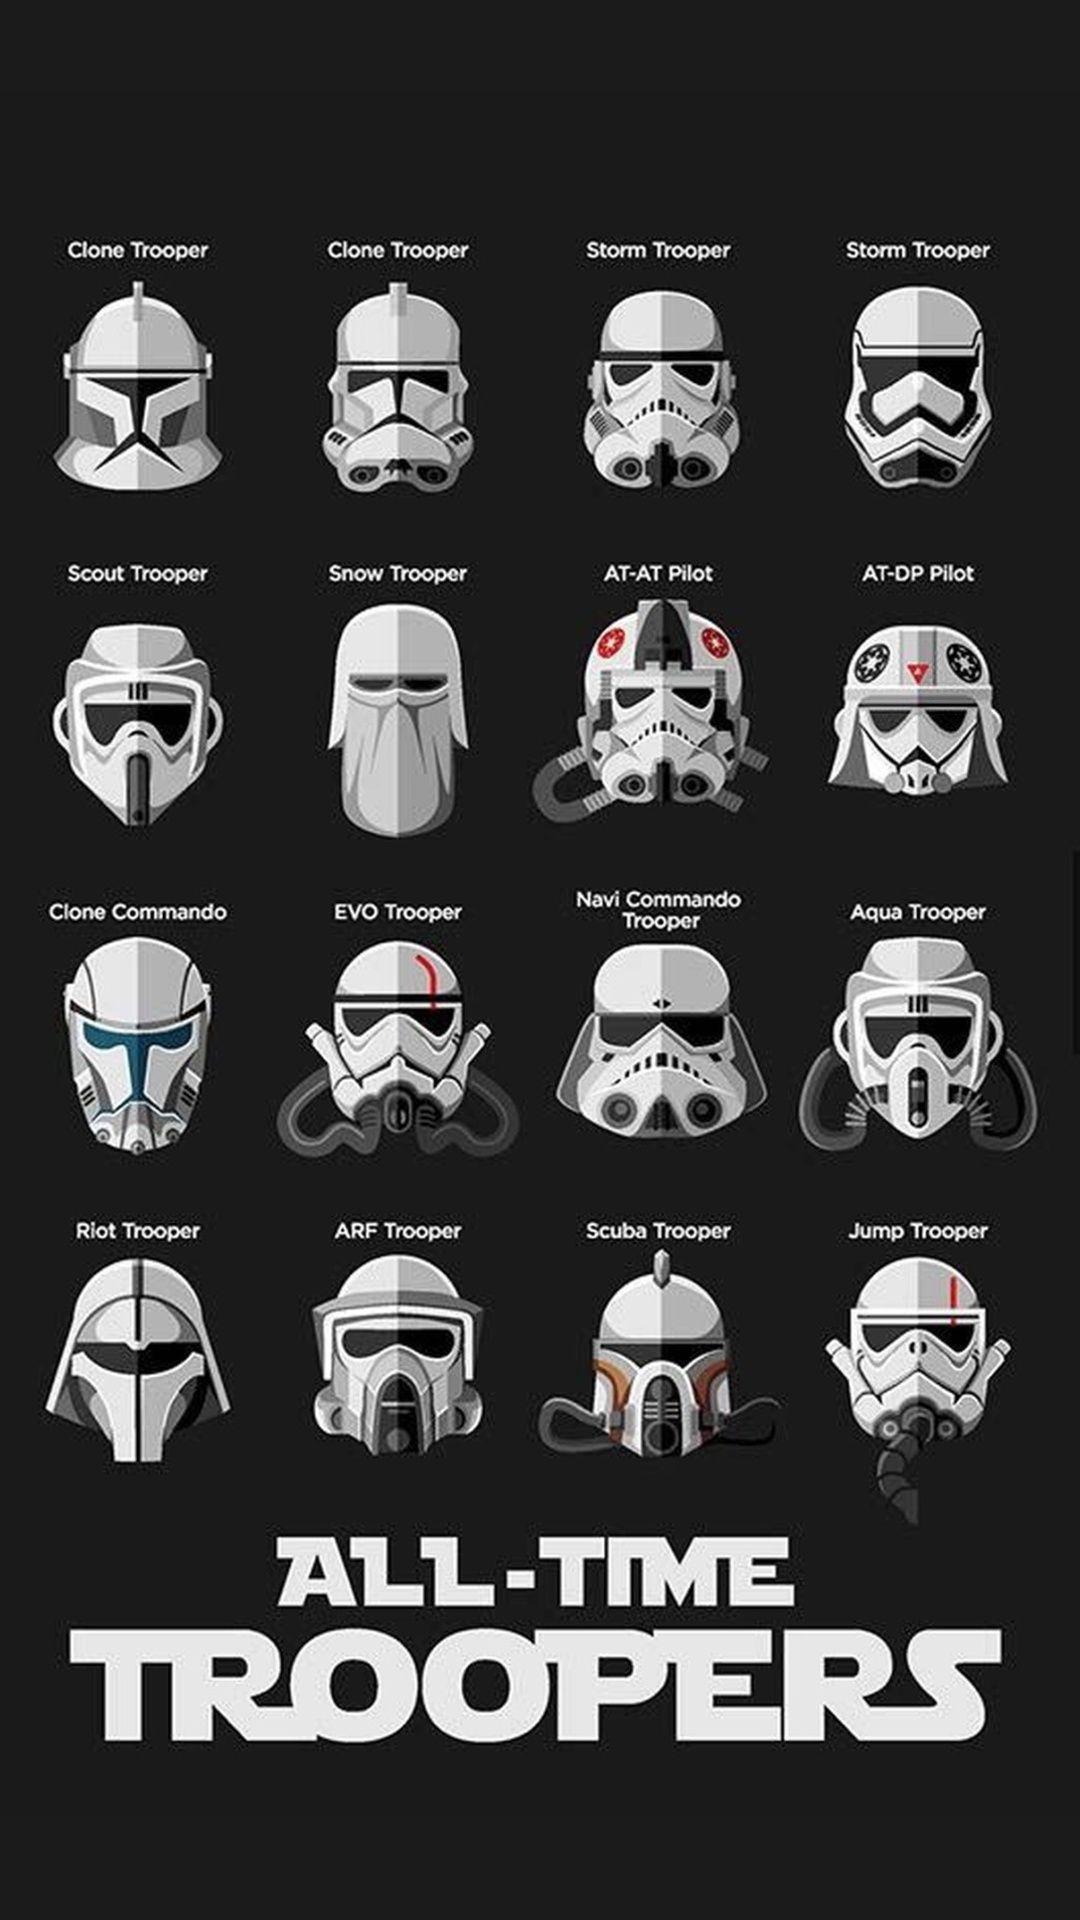 All of the Stormtrooper #StarWars. Star Wars. The o